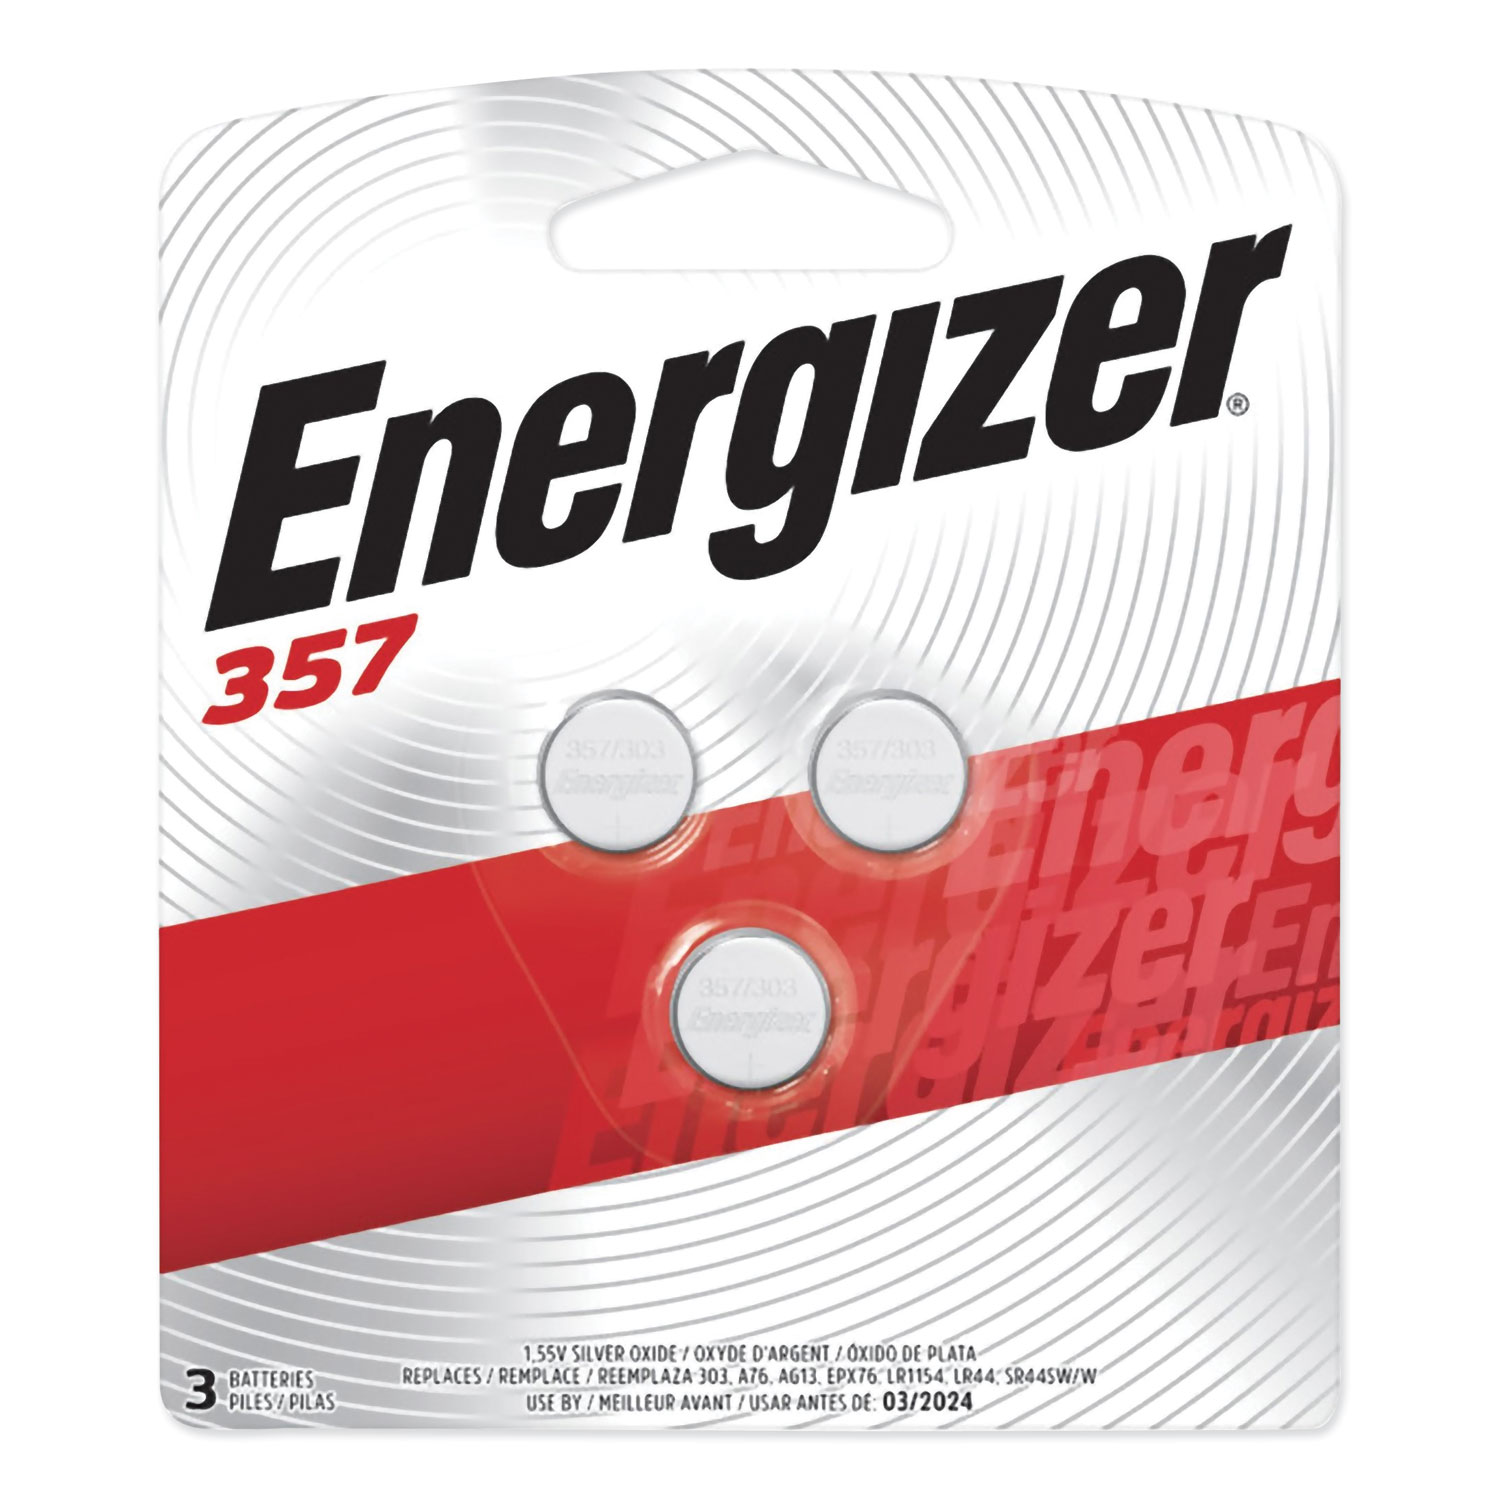  Energizer 357BPZ-3 357/303 Silver Oxide Button Cell Battery, 1.5V, 3/Pack (EVE357BPZ3) 